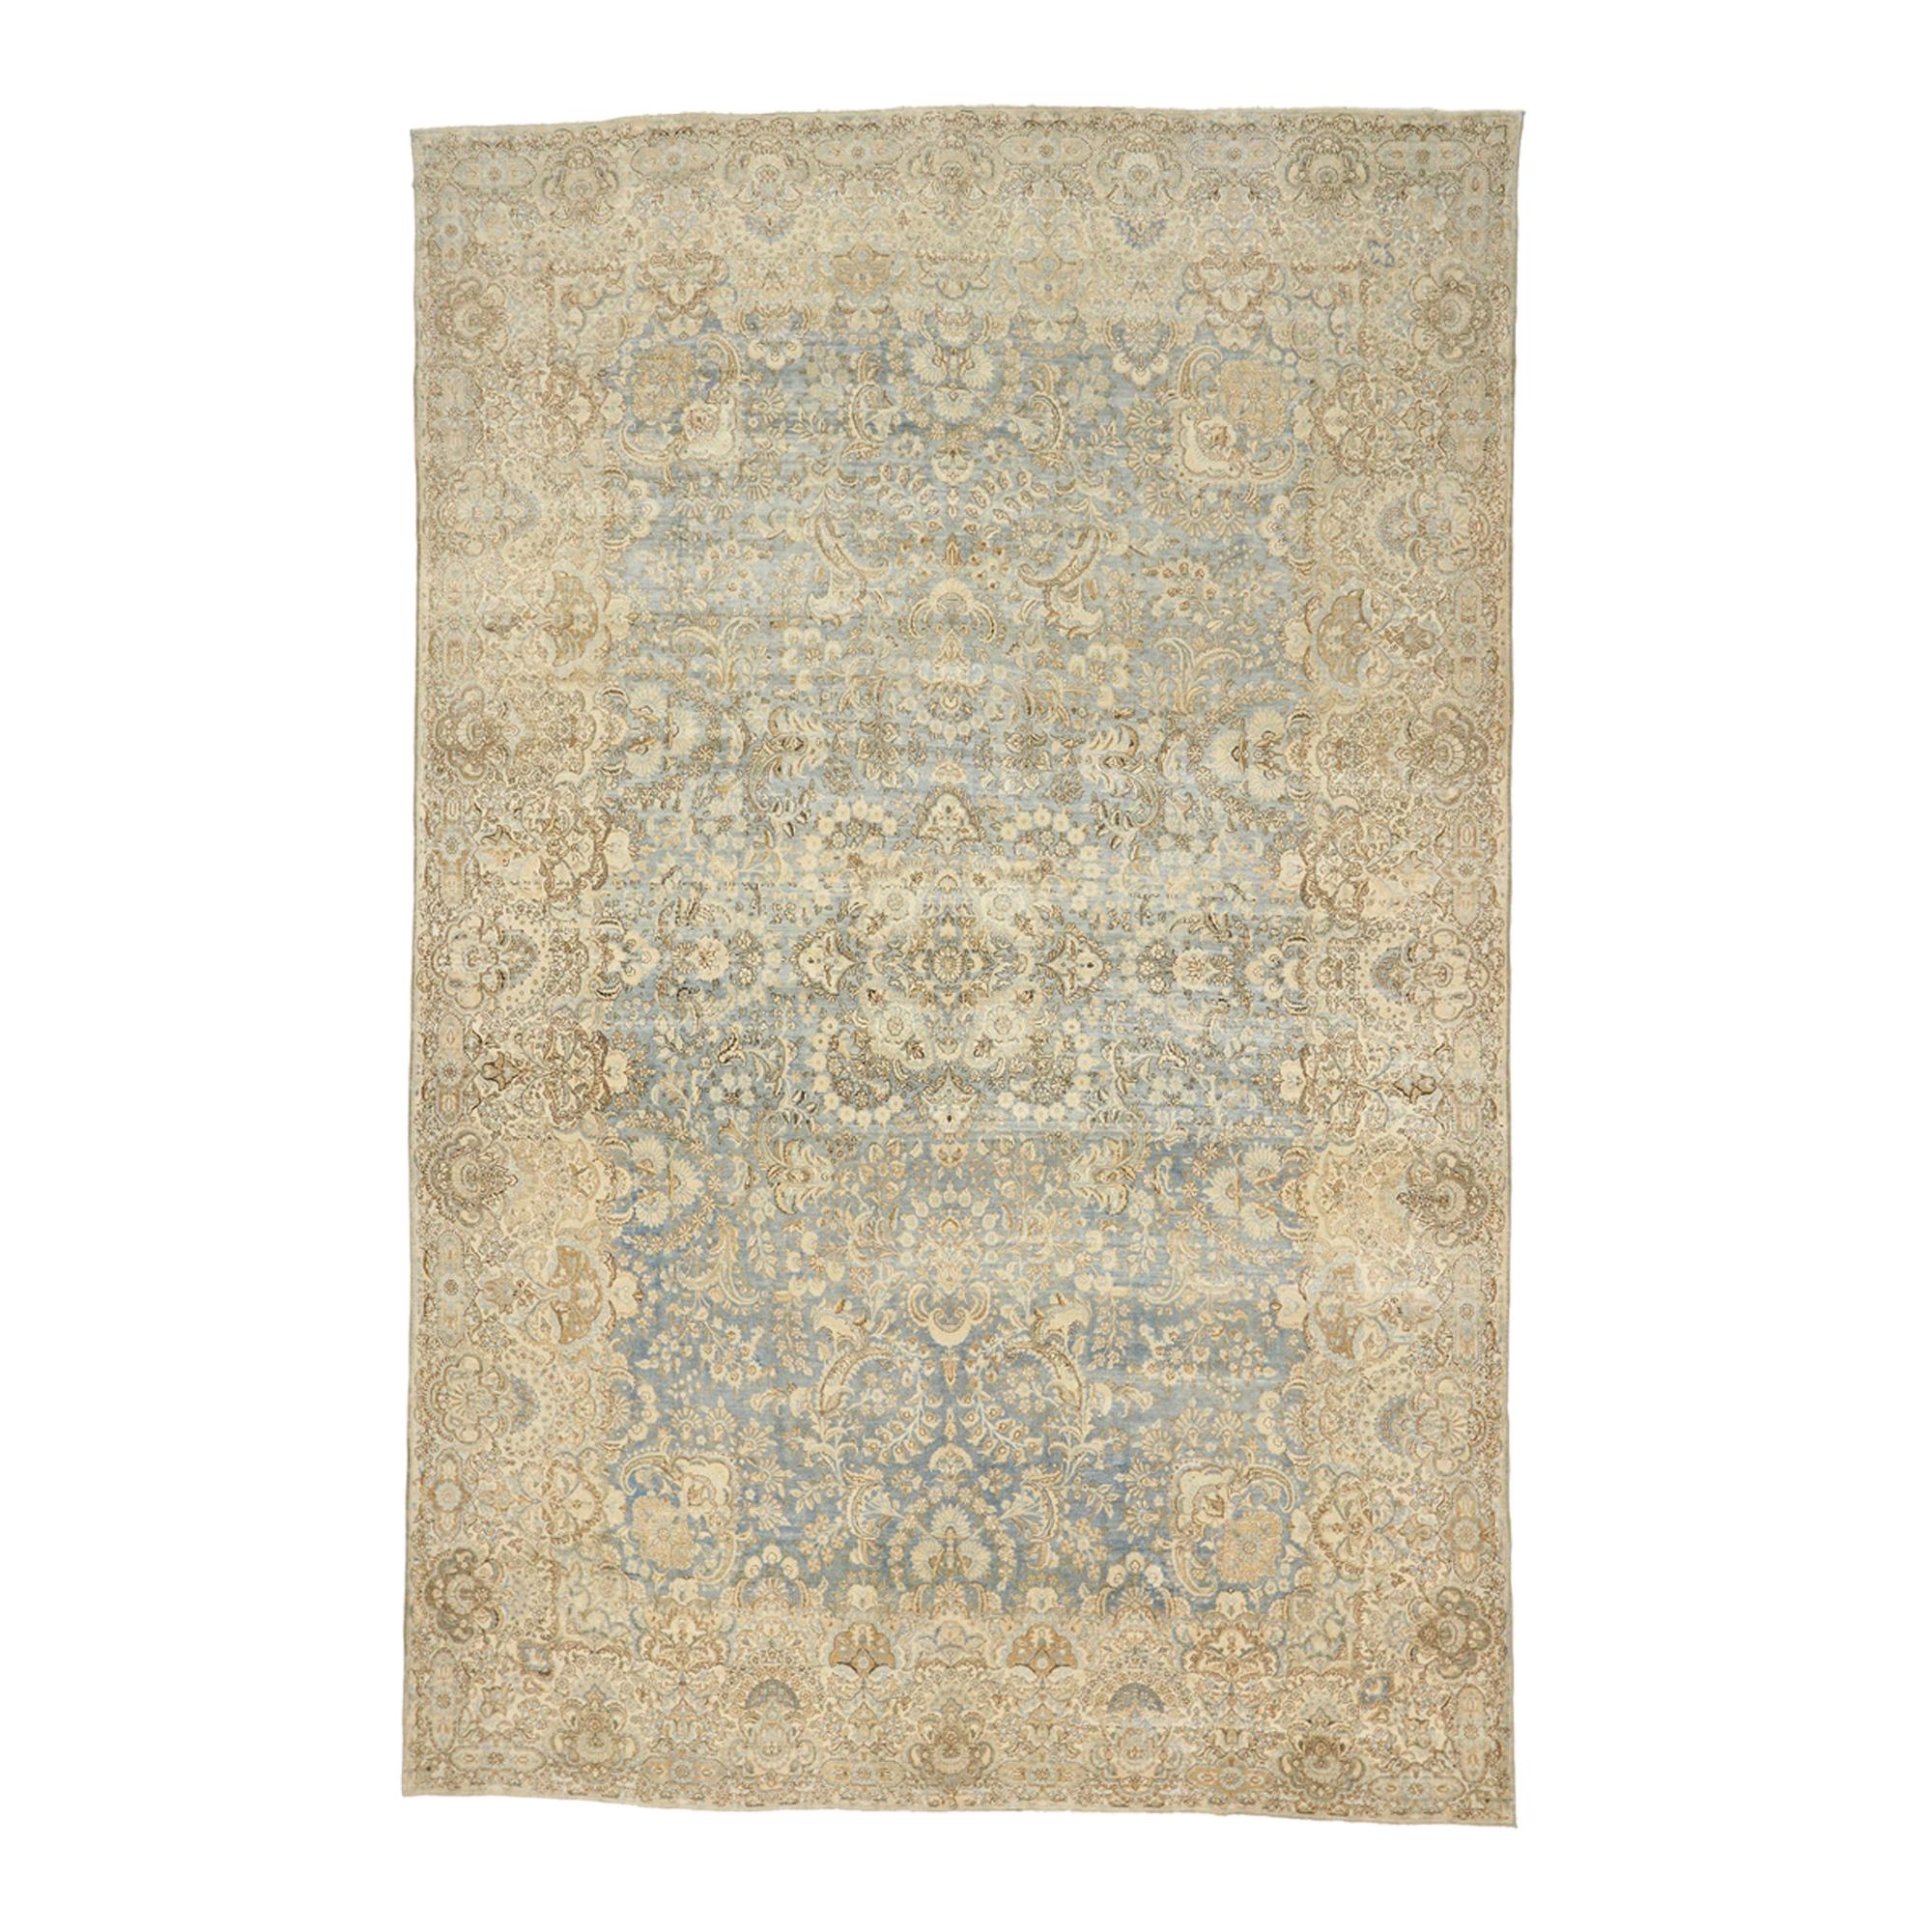 Distressed Antique Persian Kerman Palace Rug with Cotswold Country Cottage Style